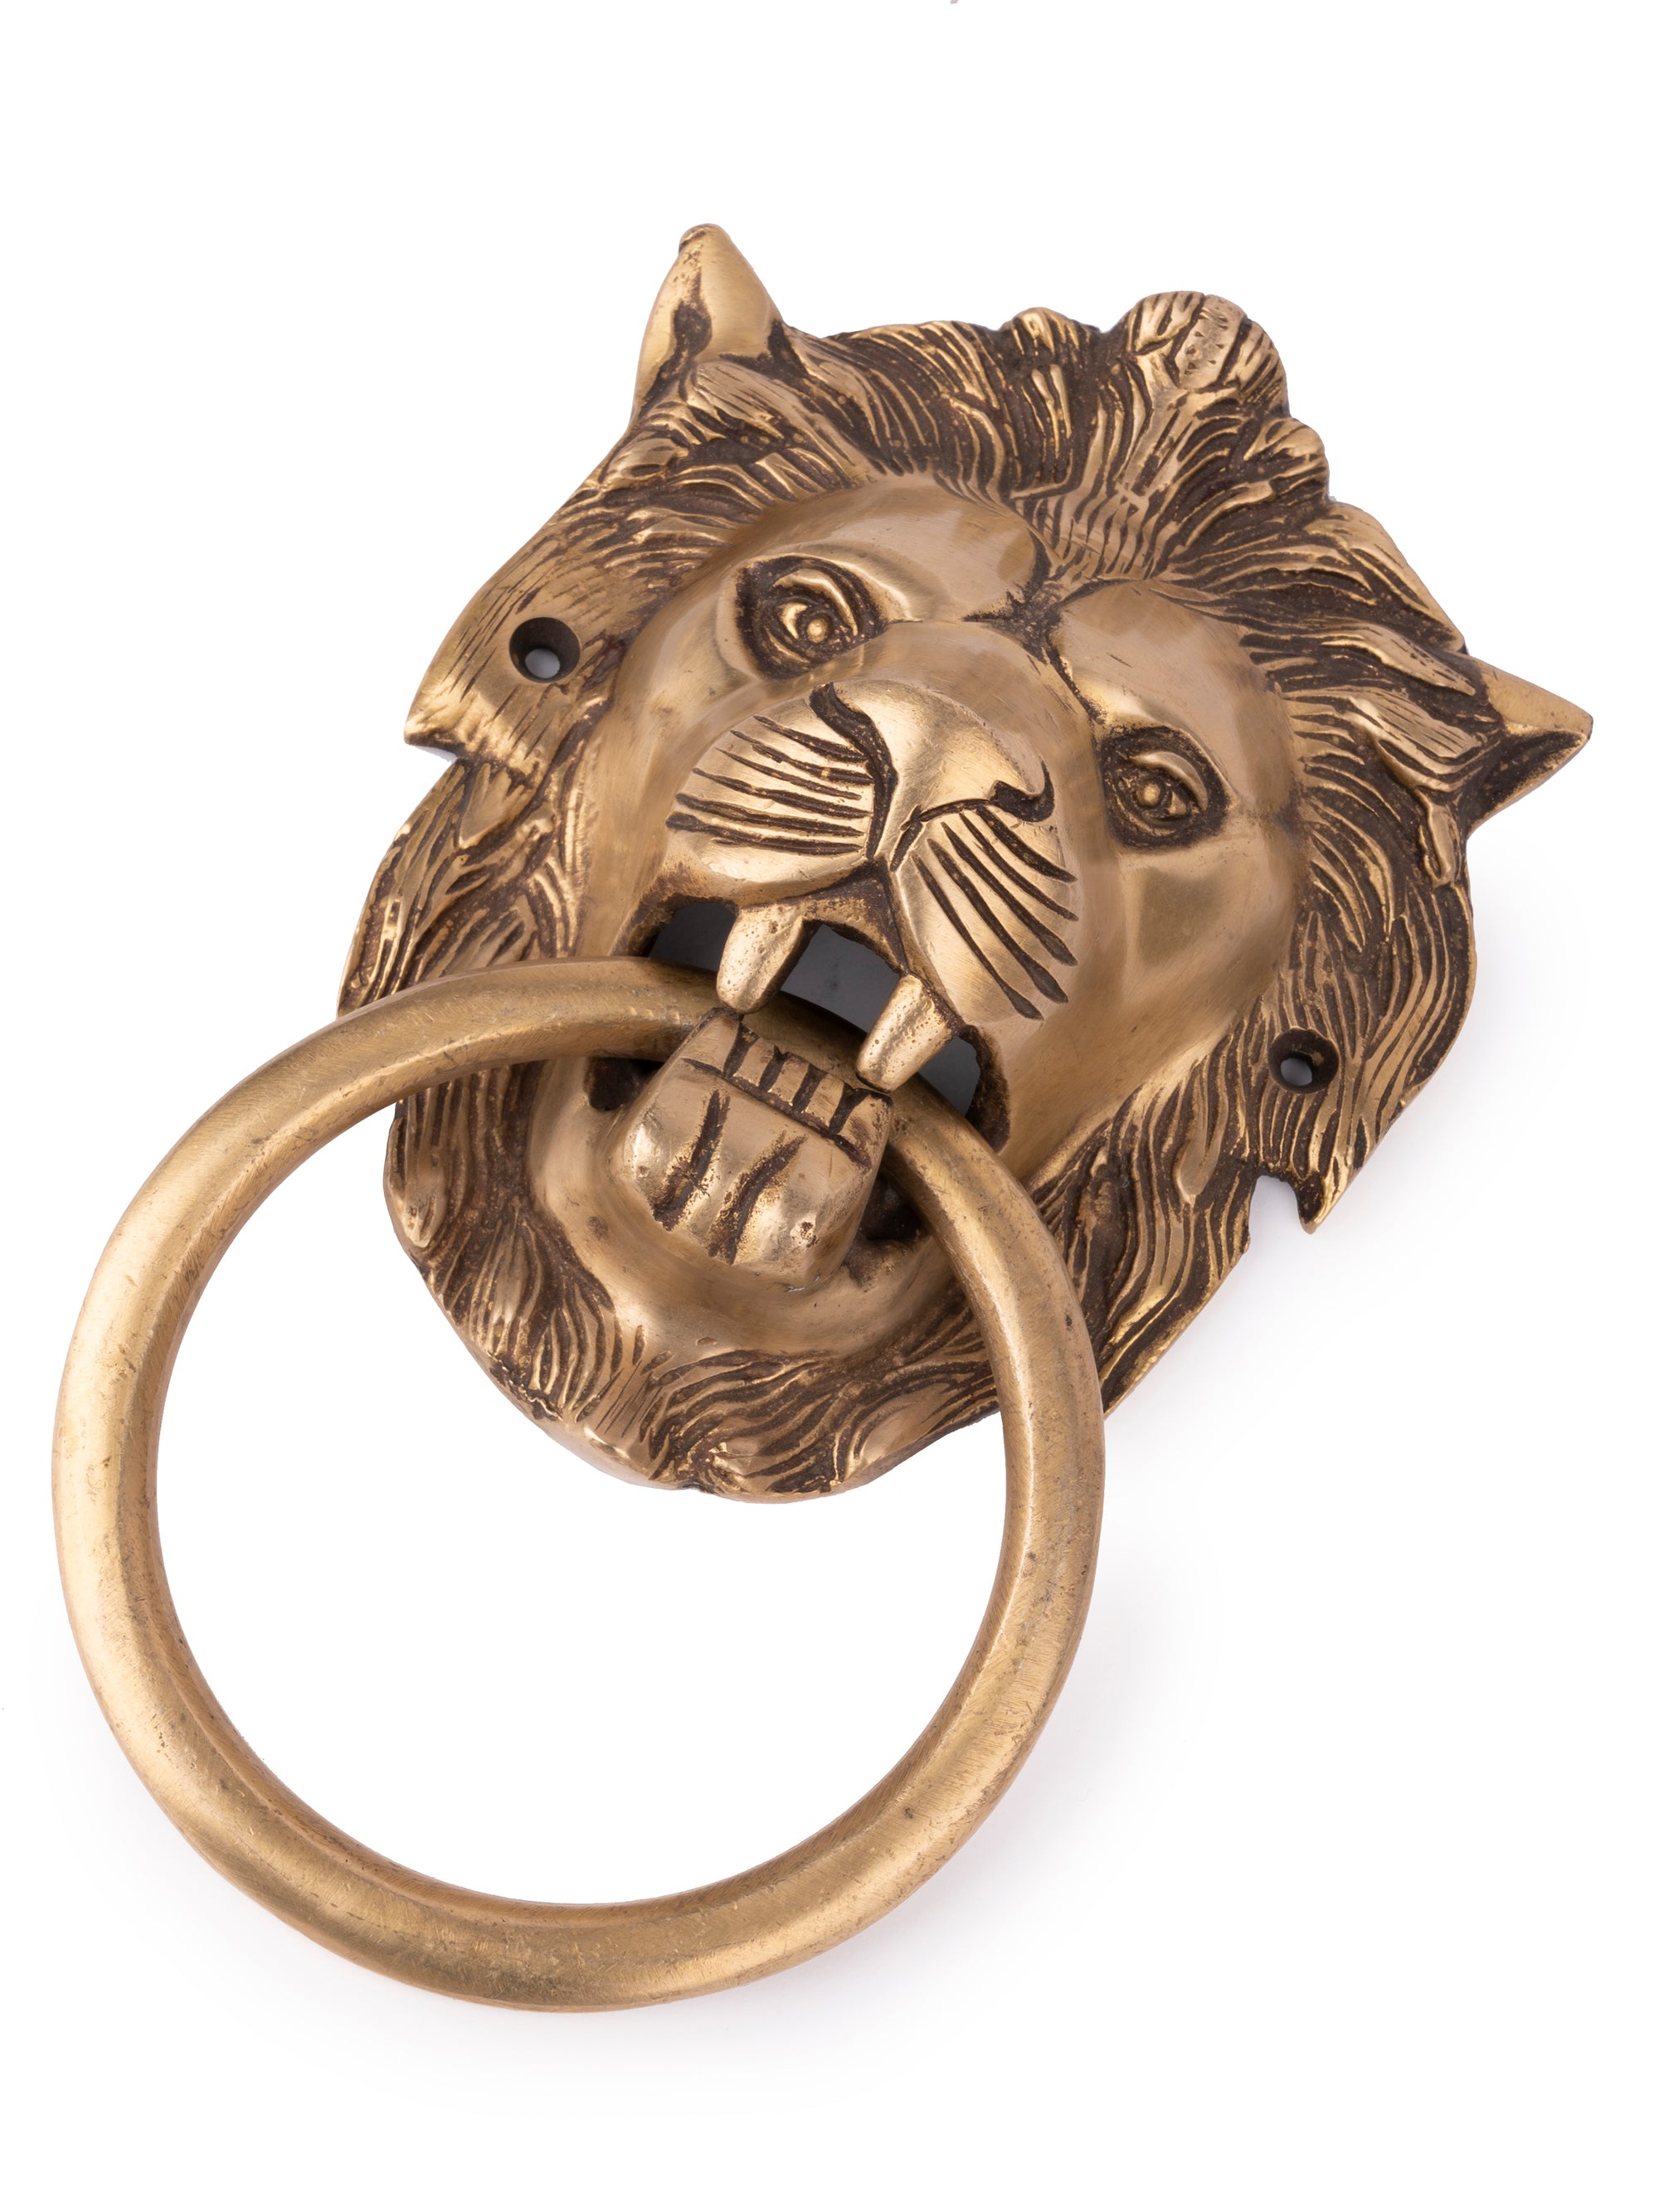 Brass Crafted Lion Head Door Knocker with Antique Finish - The Heritage Artifacts